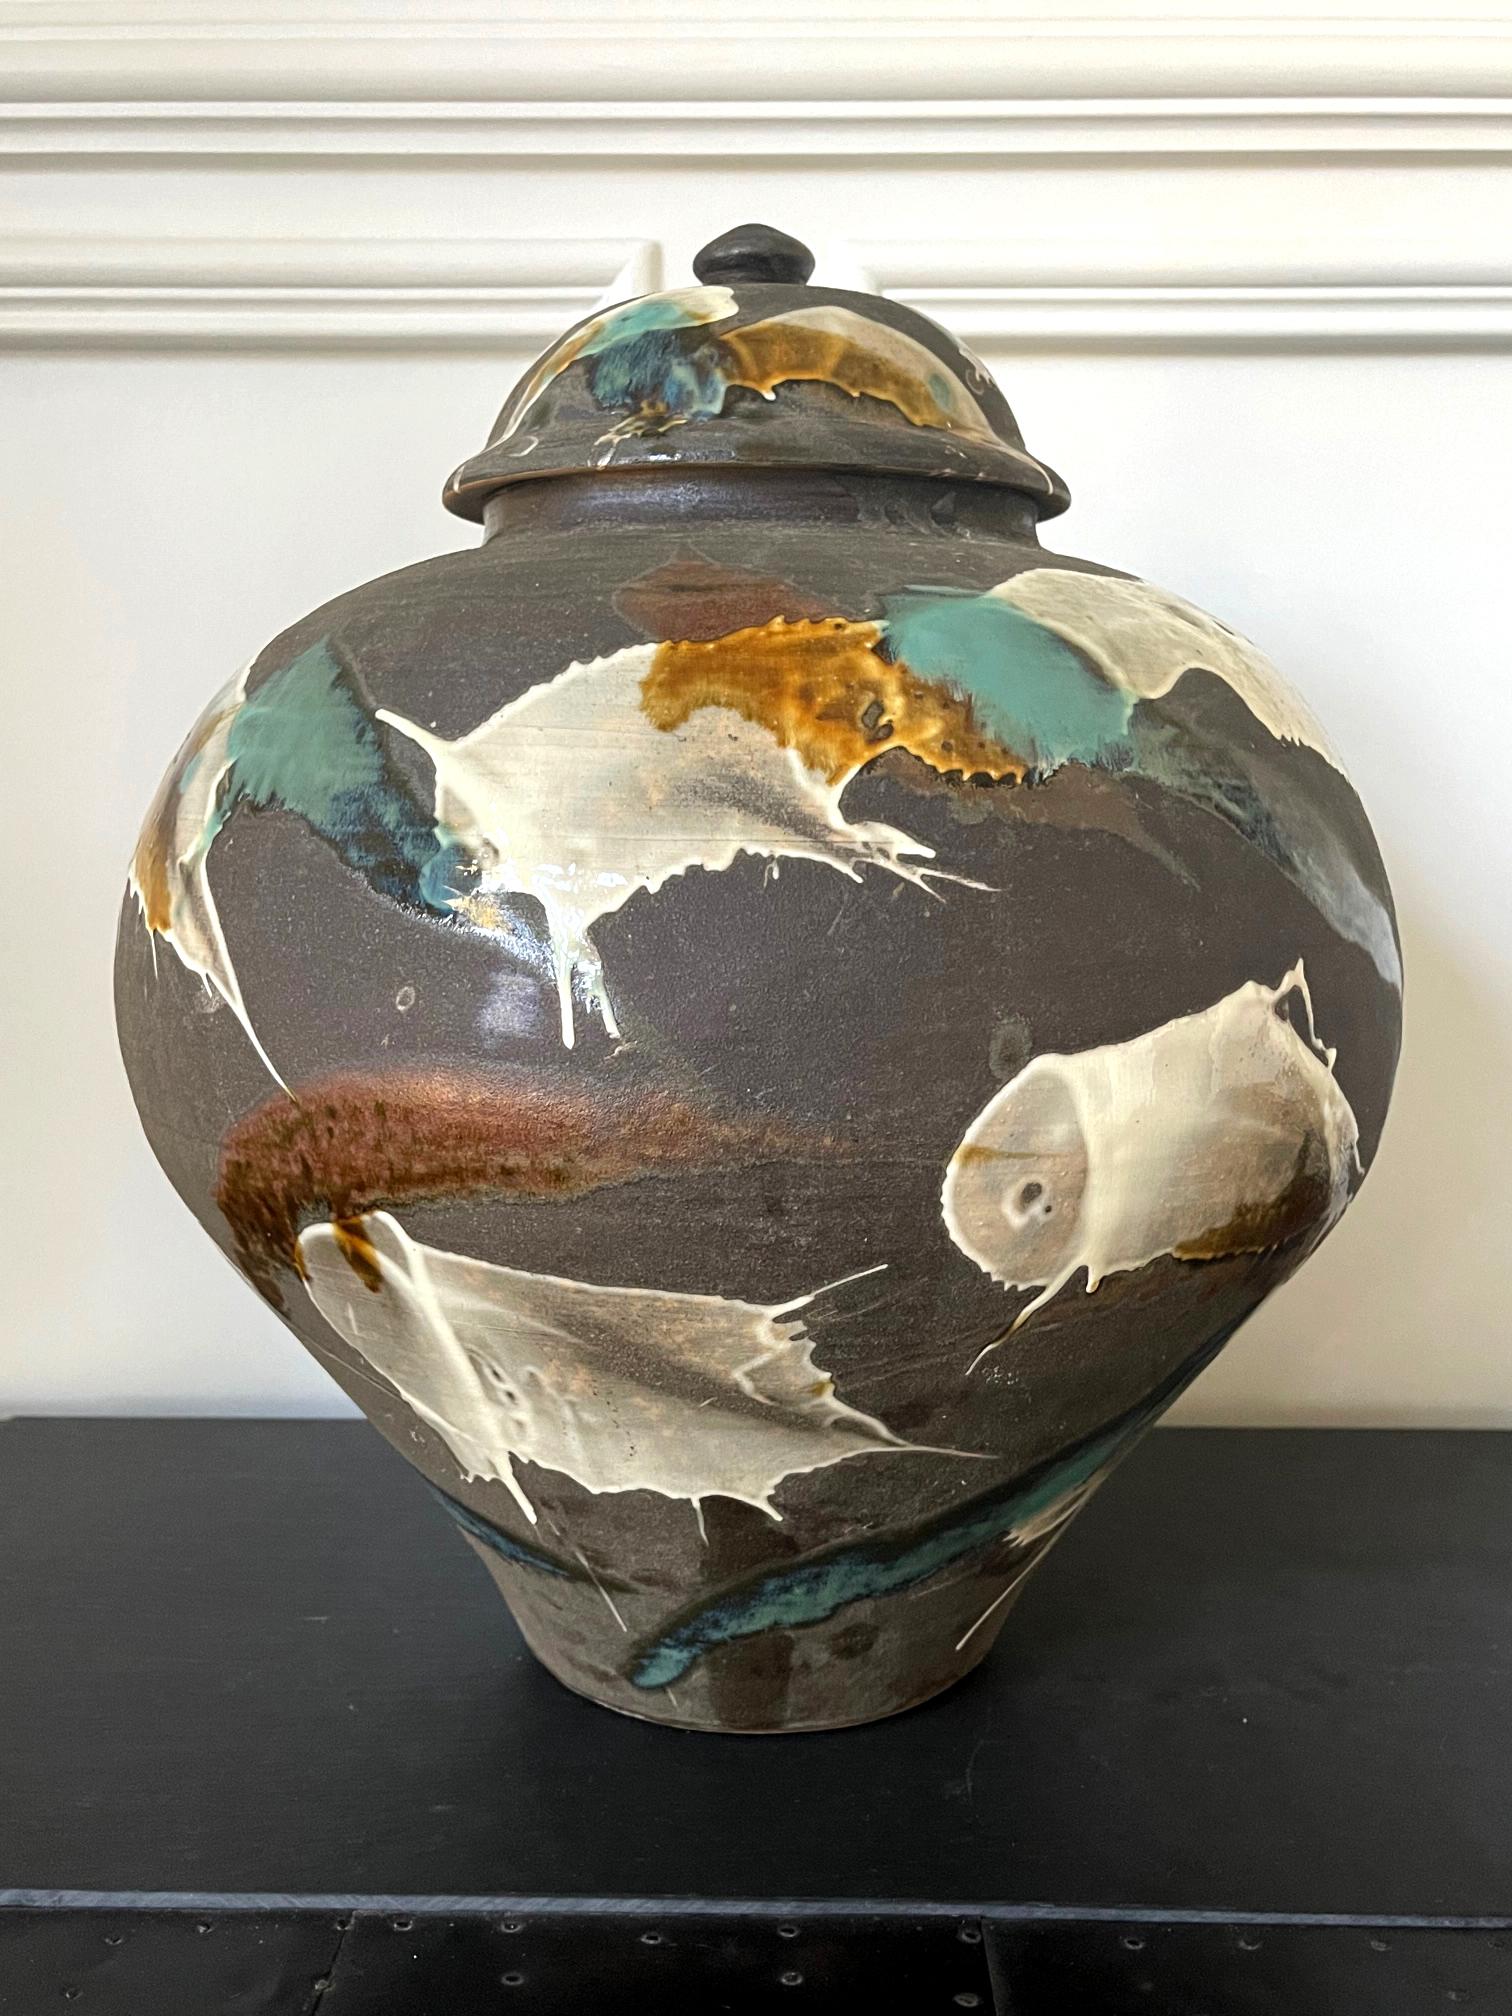 A large Japanese lidded ceramic jar from the kiln of Onda Yaki, circa 2010. The stoneware jar impresses the viewer with a robust bulbous form. Its black body is nearly unglazed but exuberantly splashed with strokes of slip glazes of white, yellow